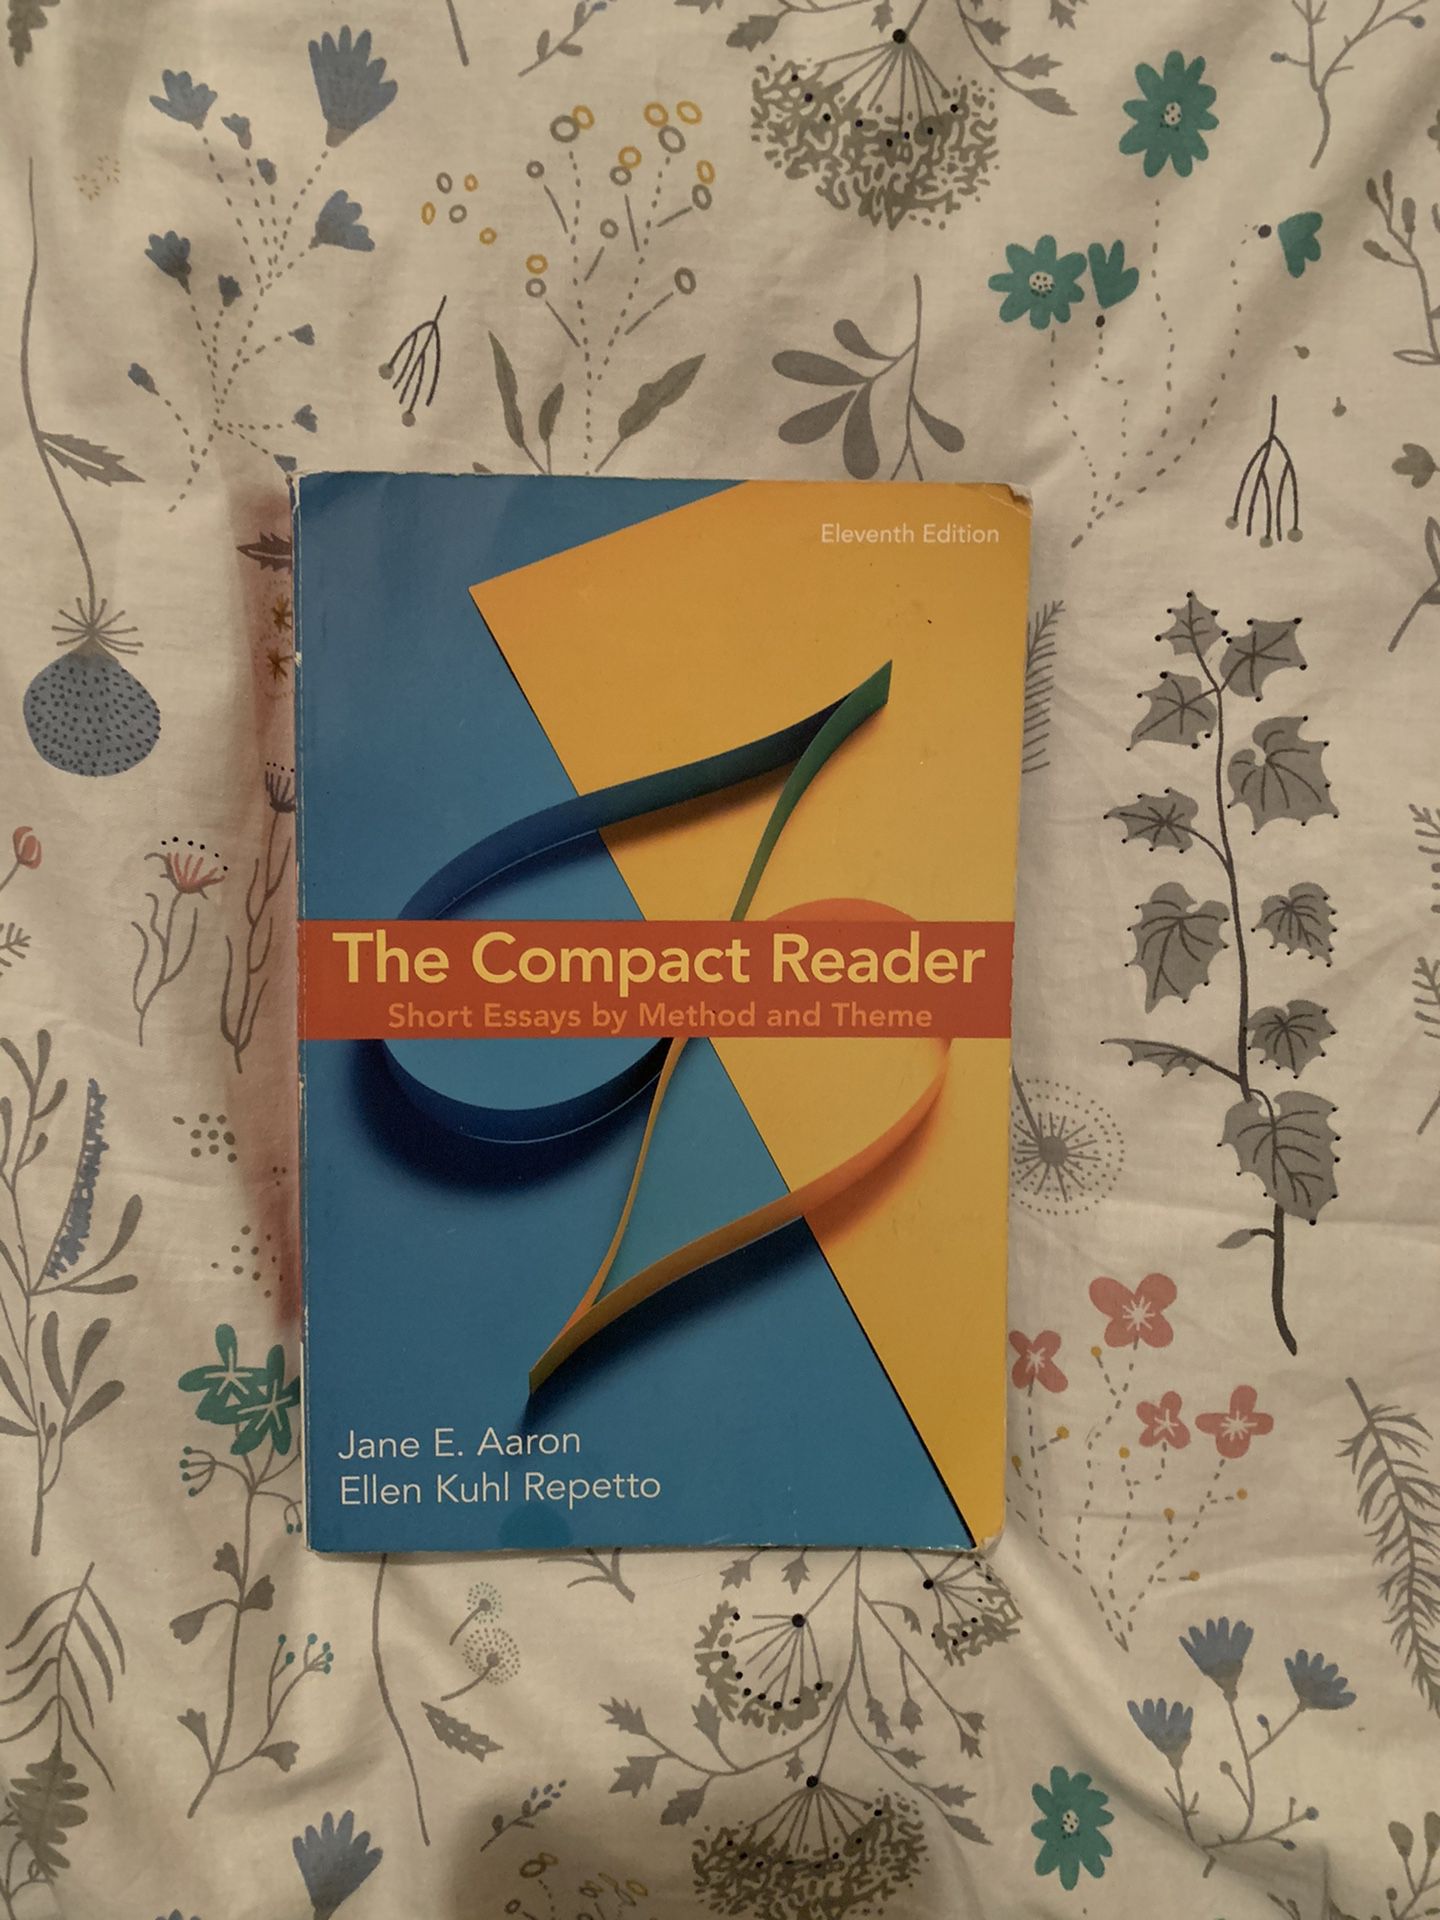 The compact reader 11th edition